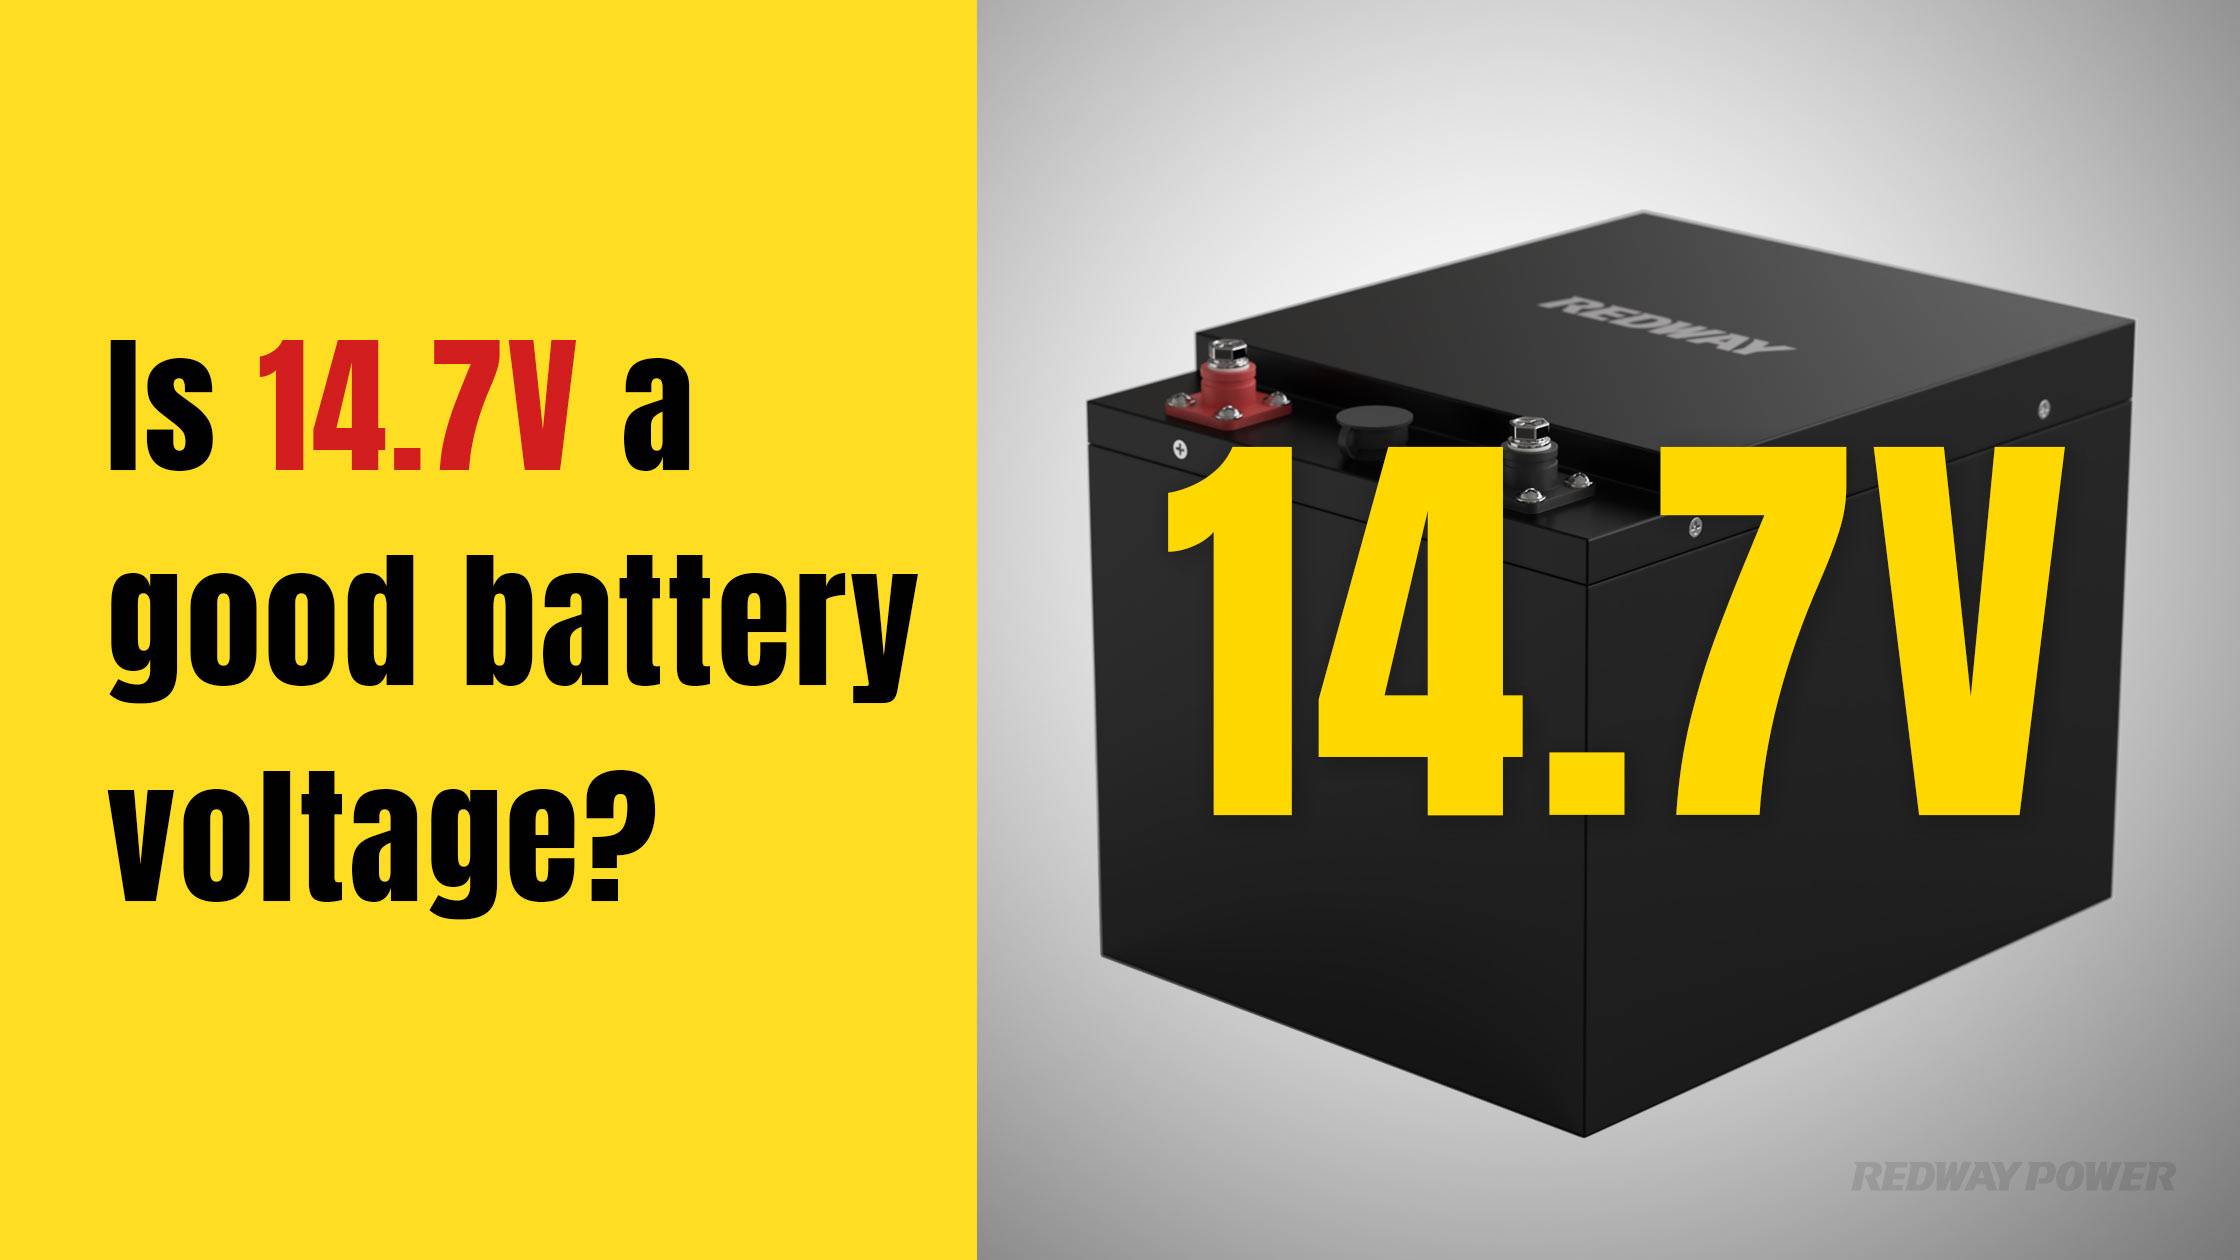 Is 14.7V a good battery voltage?